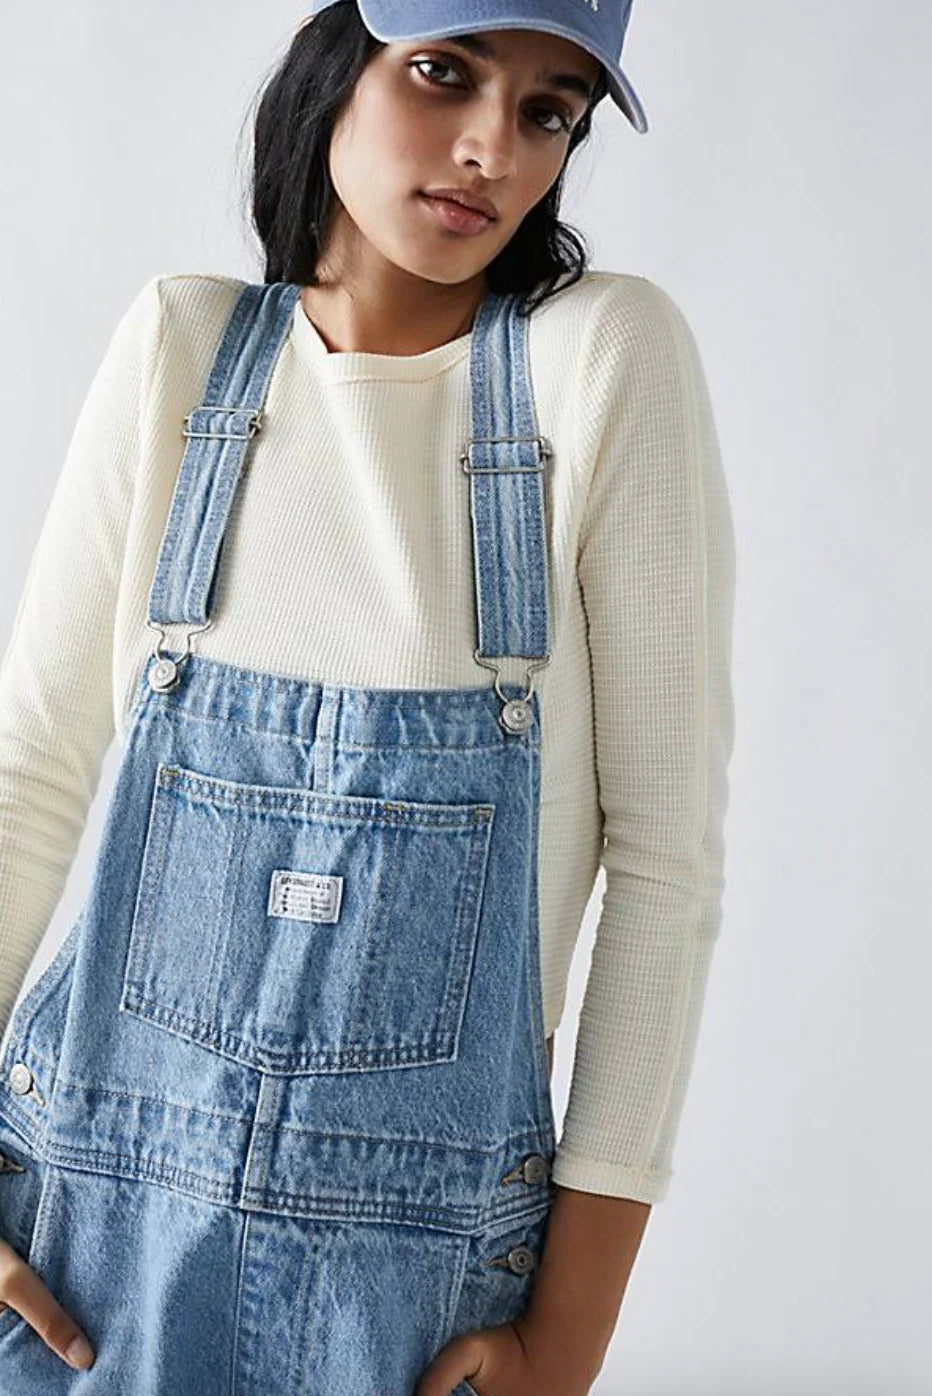 Vintage Overalls | What A Delight